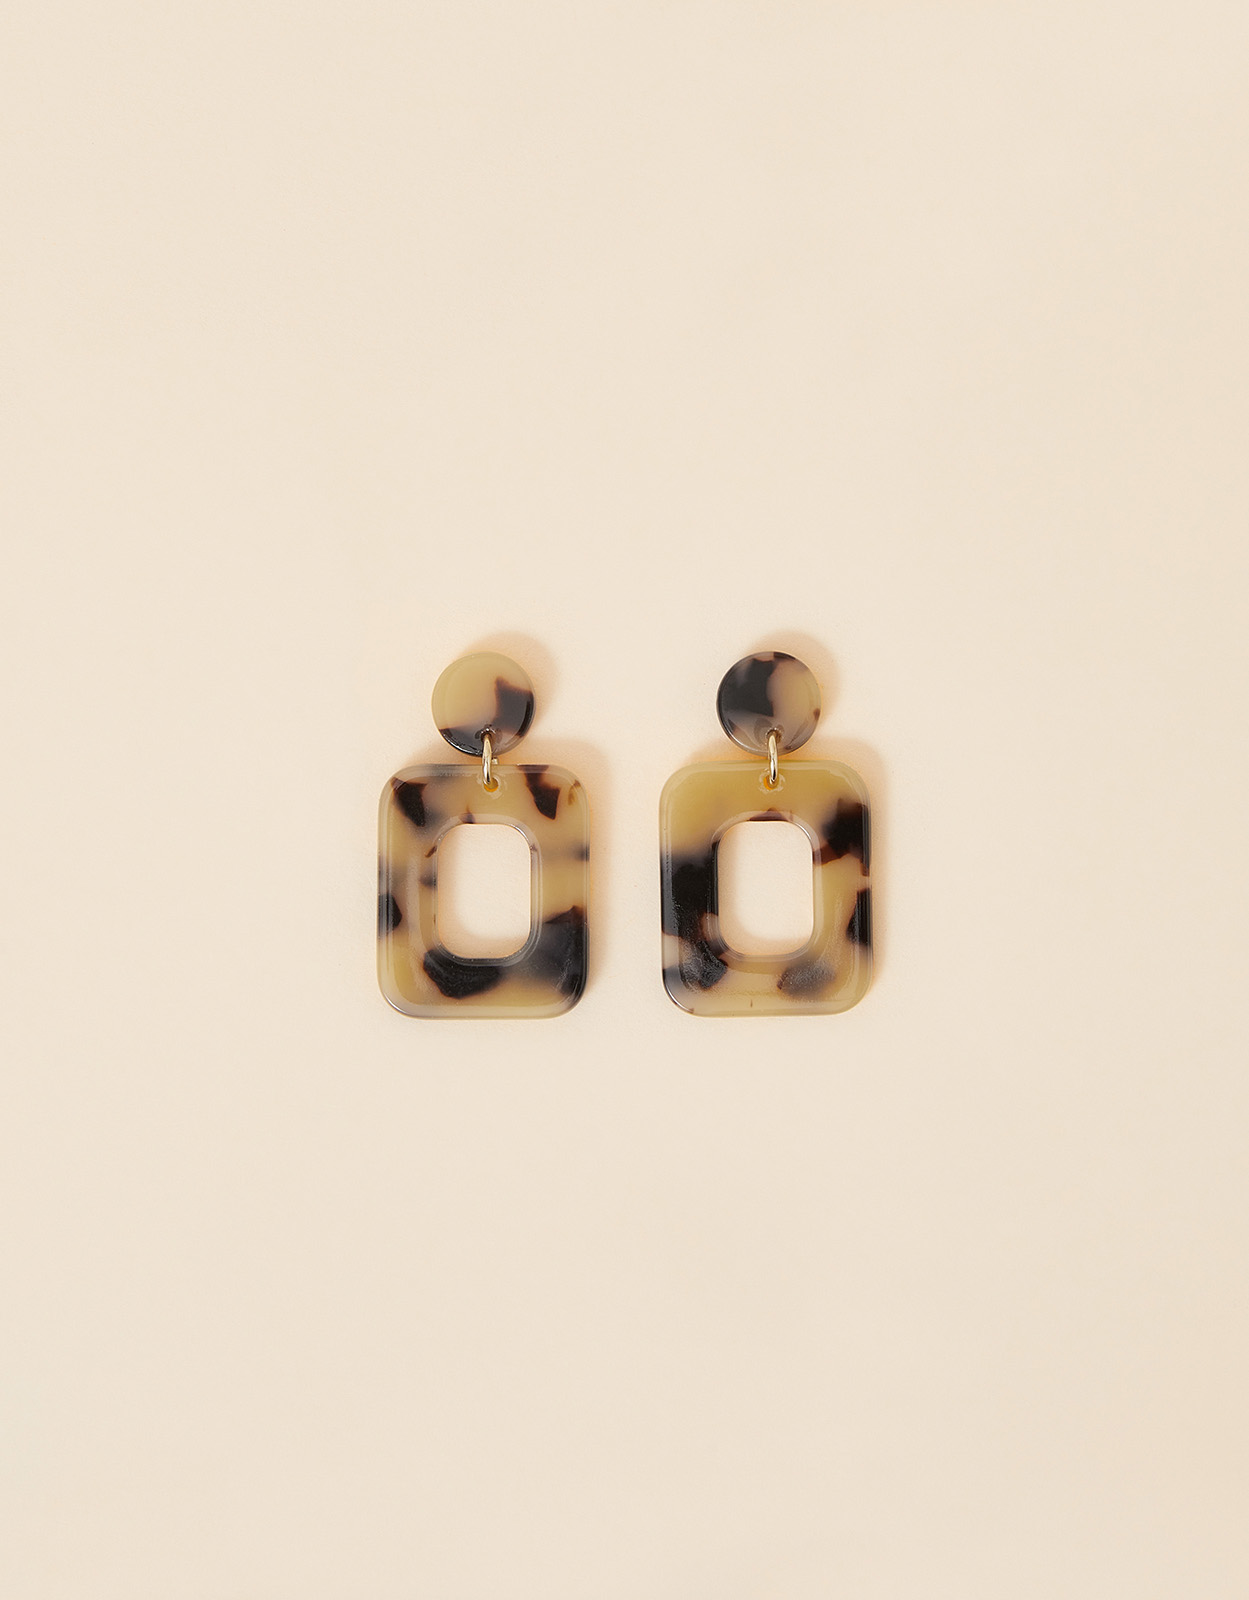 Accessorize Women's Black and Yellow Square Tortoiseshell Resin Earrings, Size: One Size